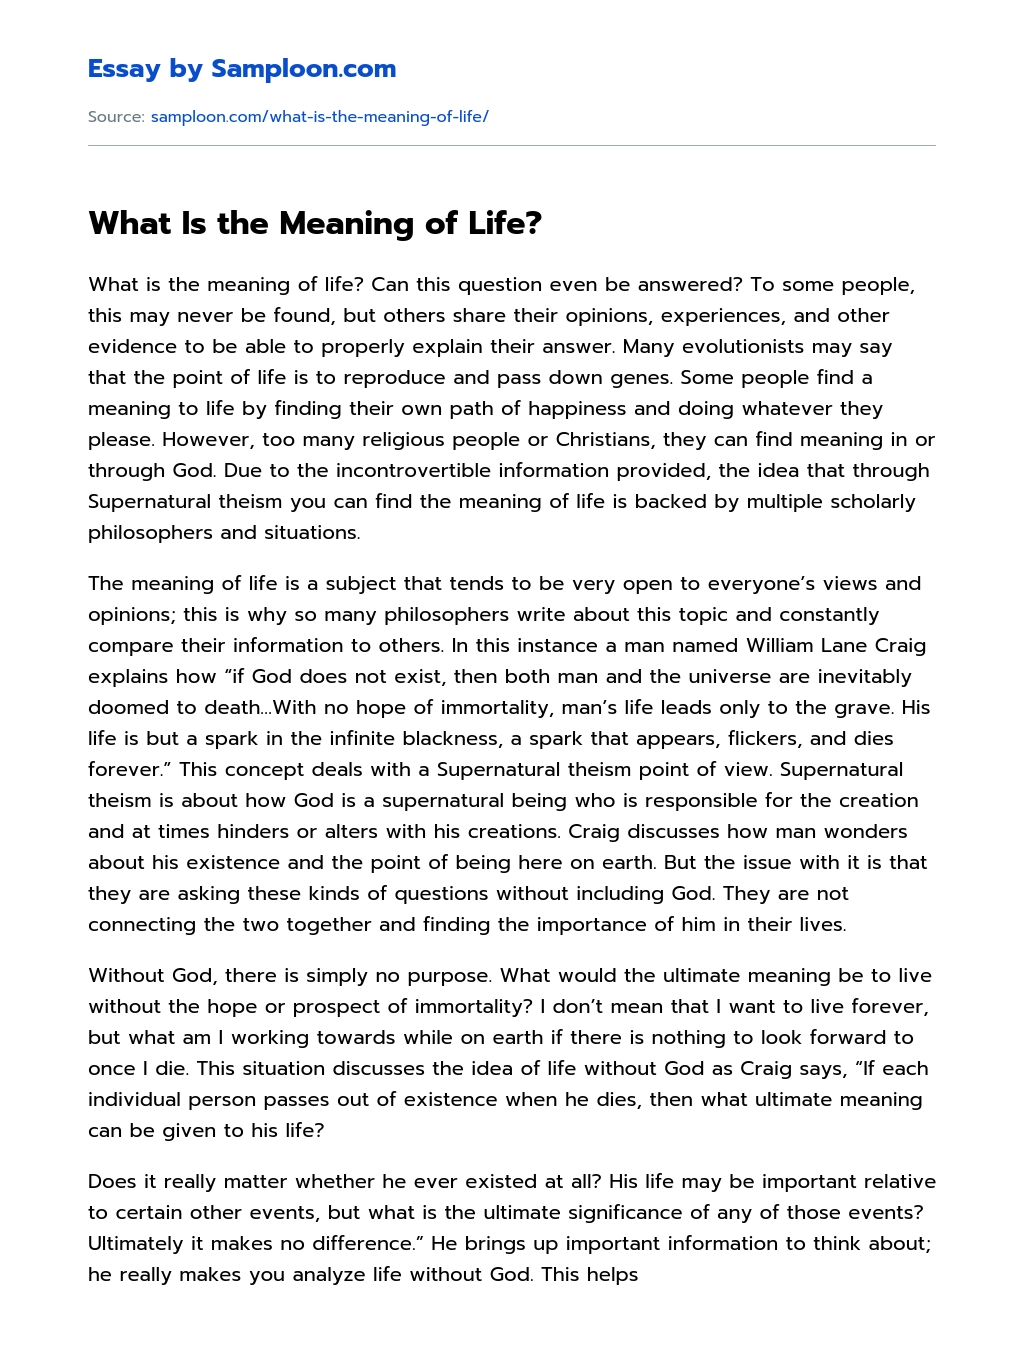 What Is the Meaning of Life? essay